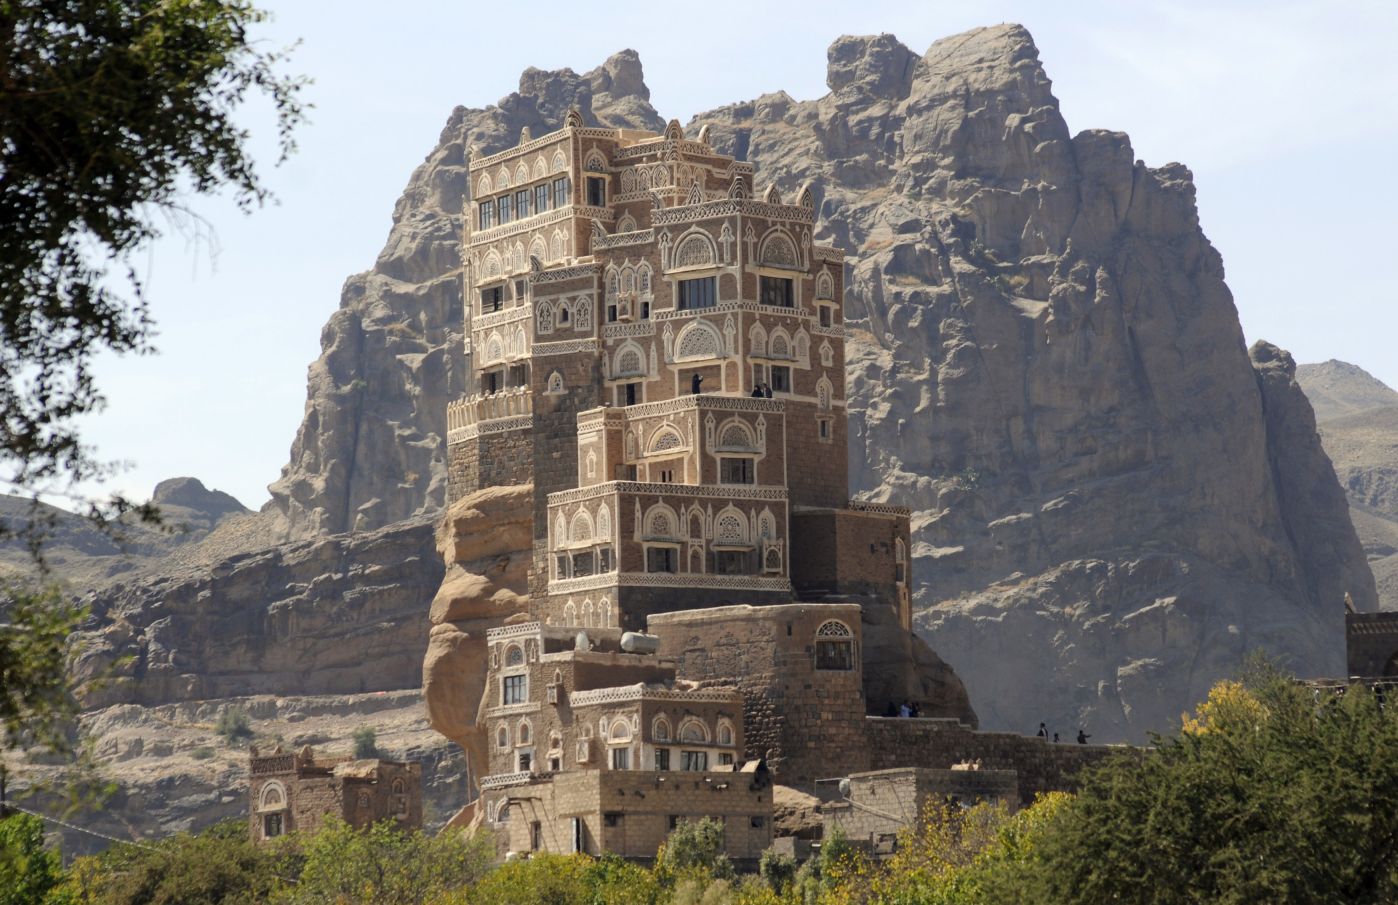 Dar al-hajar, a rock palace built in the 1930s, is seen near Sanaa November 7, 2011. Hundreds of Muslims around the country visit the monument during Eid al-Adha. REUTERS/Mohamed al-Sayaghi (YEMEN - Tags: SOCIETY)